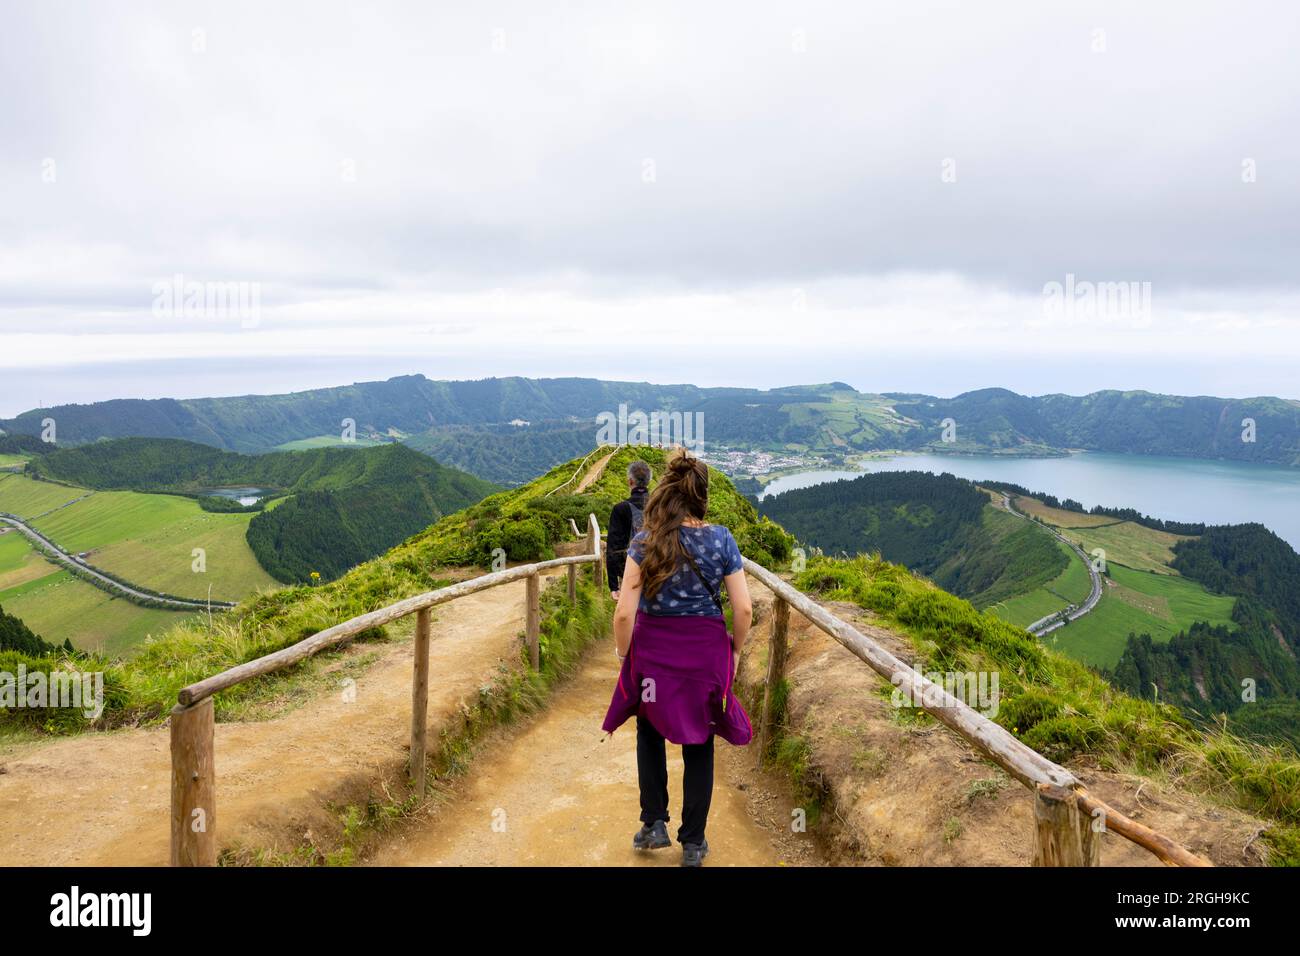 Landscape view of Twin Lakes of Sete Cidades from Boca do Inferno viewpoint in the island of Sao Miguel, Azores, Portugal Stock Photo